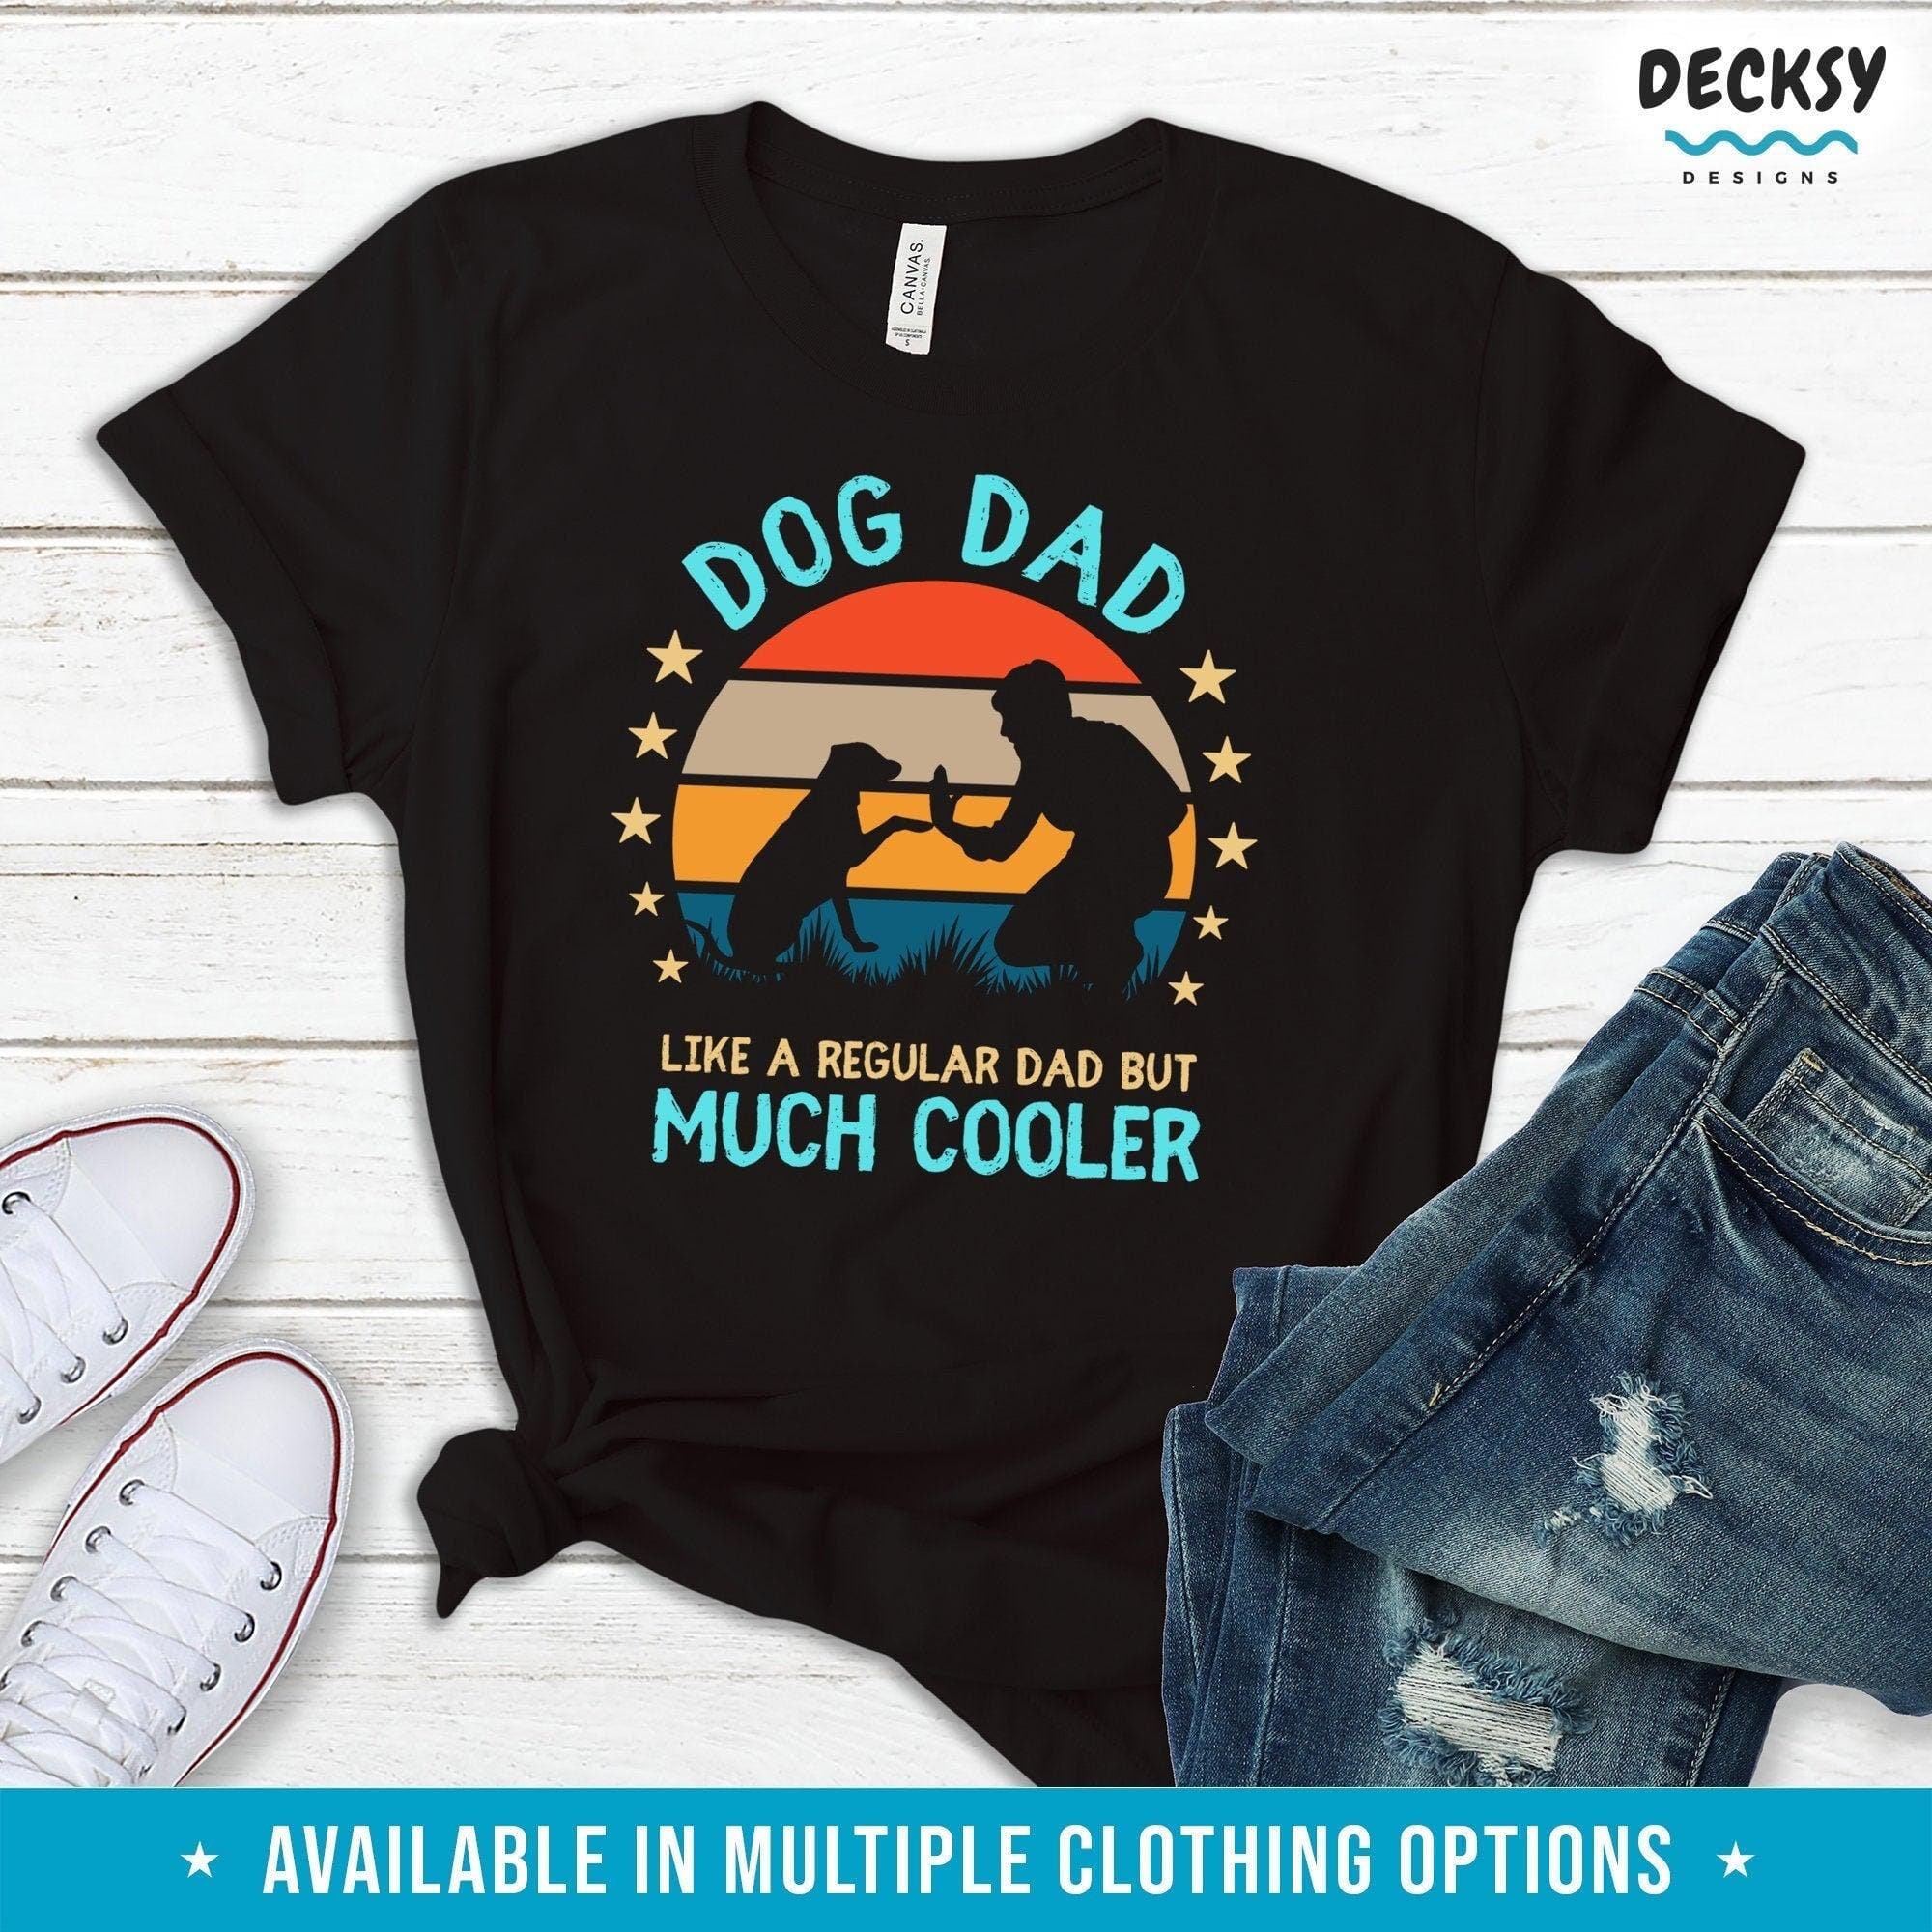 Dog Dad Shirt, Funny Dog Owner Gift-Clothing:Gender-Neutral Adult Clothing:Tops & Tees:T-shirts:Graphic Tees-DecksyDesigns